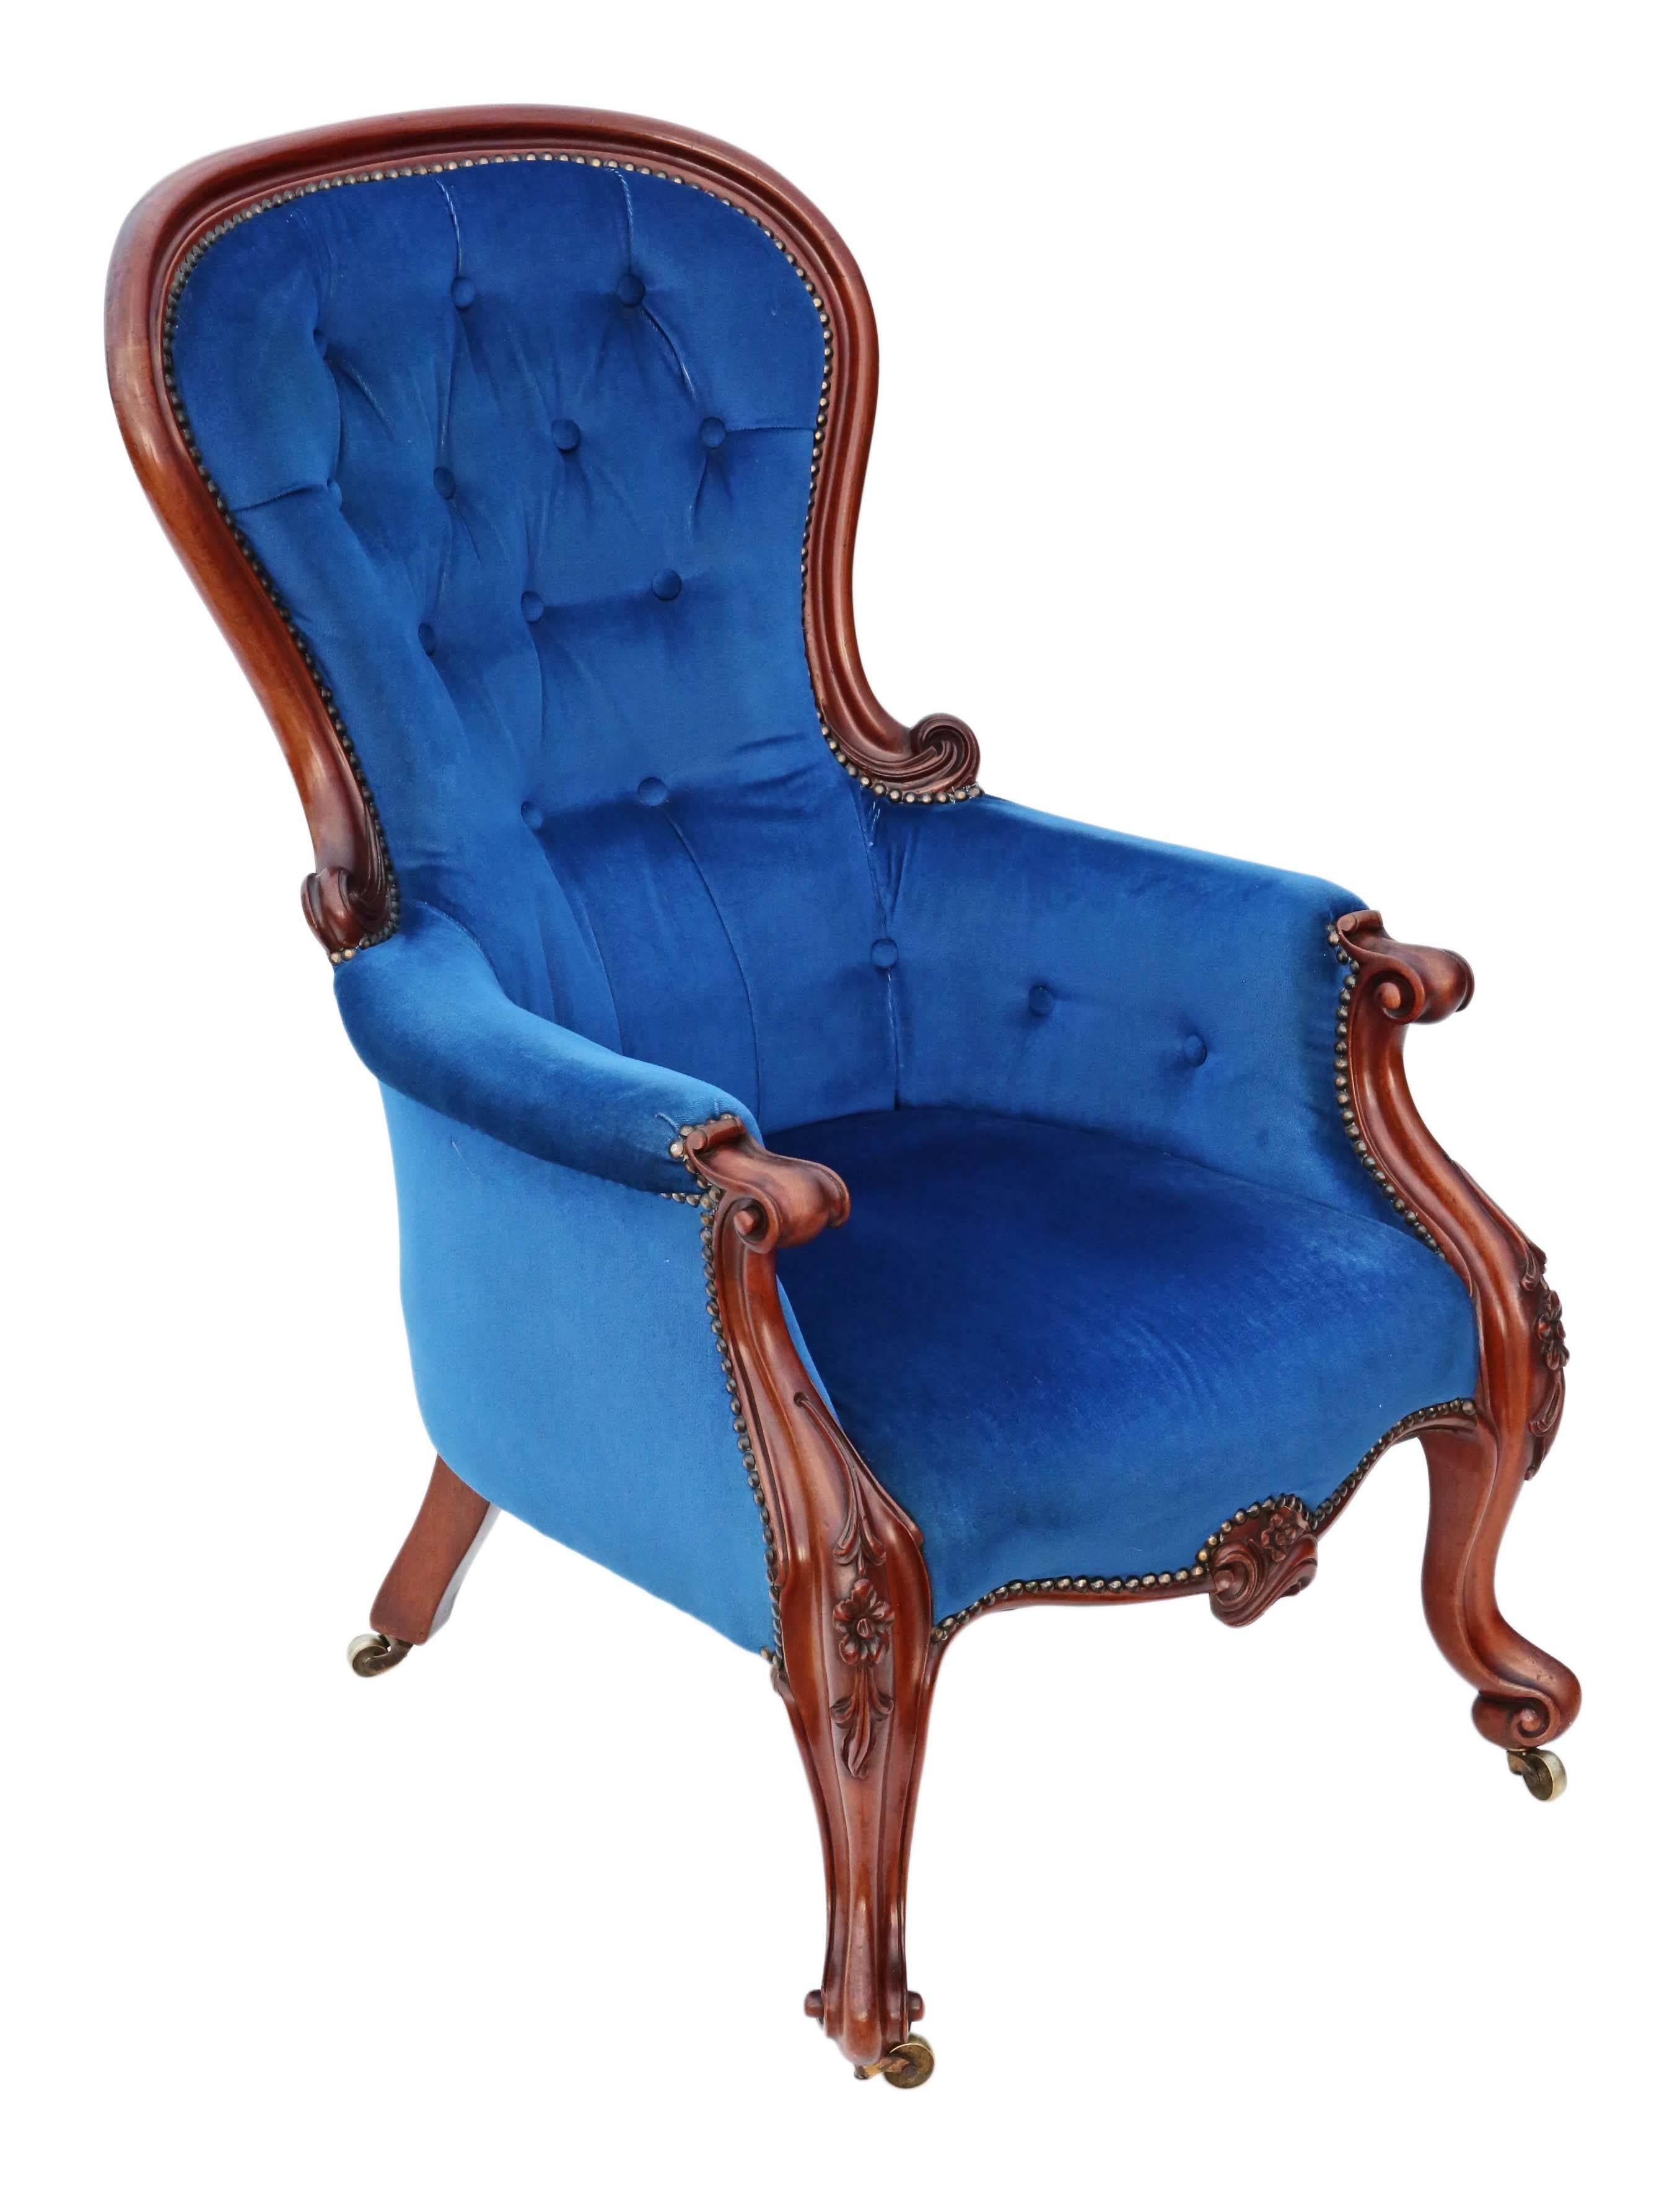 Late 19th Century Antique Quality Victorian circa 1870 Mahogany Spoon Back Armchair Slipper For Sale